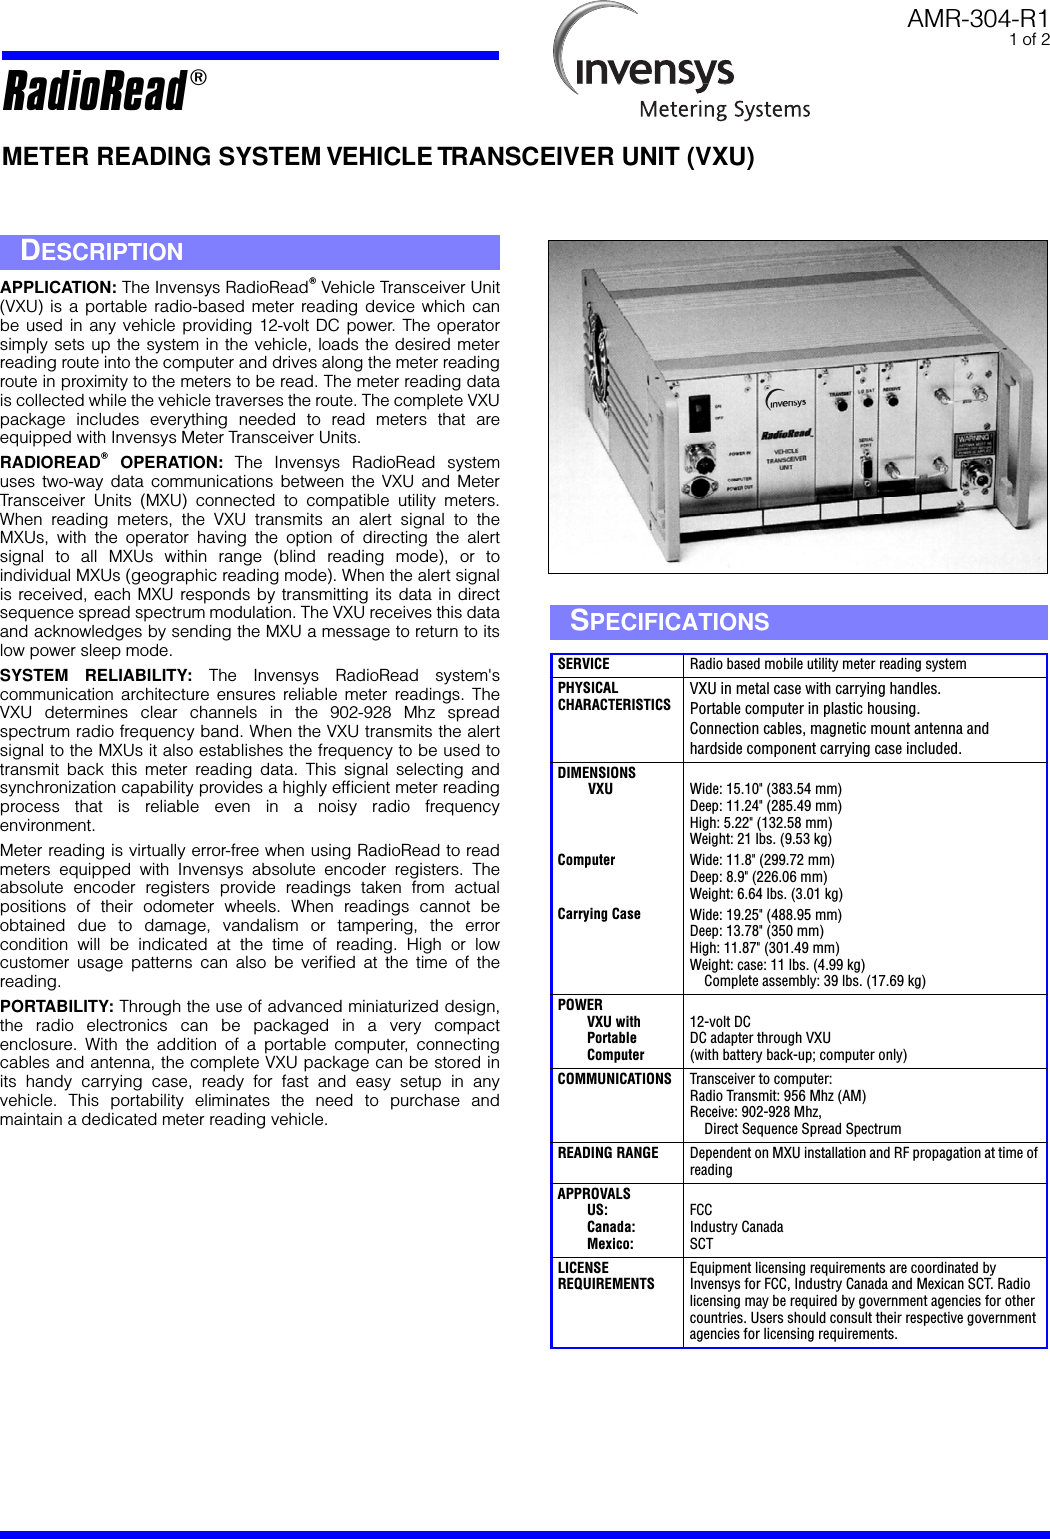   AMR-304-R1 1 of 2 METER READING SYSTEM VEHICLE TRANSCEIVER UNIT (VXU) APPLICATION:  The Invensys RadioRead T  Vehicle Transceiver Unit(VXU) is a portable radio-based meter reading device which canbe used in any vehicle providing 12-volt DC power. The operatorsimply sets up the system in the vehicle, loads the desired meterreading route into the computer and drives along the meter readingroute in proximity to the meters to be read. The meter reading datais collected while the vehicle traverses the route. The complete VXUpackage includes everything needed to read meters that areequipped with Invensys Meter Transceiver Units. RADIOREAD T  OPERATION:  The Invensys RadioRead systemuses two-way data communications between the VXU and MeterTransceiver Units (MXU) connected to compatible utility meters.When reading meters, the VXU transmits an alert signal to theMXUs, with the operator having the option of directing the alertsignal to all MXUs within range (blind reading mode), or toindividual MXUs (geographic reading mode). When the alert signalis received, each MXU responds by transmitting its data in directsequence spread spectrum modulation. The VXU receives this dataand acknowledges by sending the MXU a message to return to itslow power sleep mode. SYSTEM RELIABILITY:  The Invensys RadioRead system&apos;scommunication architecture ensures reliable meter readings. TheVXU determines clear channels in the 902-928 Mhz spreadspectrum radio frequency band. When the VXU transmits the alertsignal to the MXUs it also establishes the frequency to be used totransmit back this meter reading data. This signal selecting andsynchronization capability provides a highly efﬁcient meter readingprocess that is reliable even in a noisy radio frequencyenvironment.Meter reading is virtually error-free when using RadioRead to readmeters equipped with Invensys absolute encoder registers. Theabsolute encoder registers provide readings taken from actualpositions of their odometer wheels. When readings cannot beobtained due to damage, vandalism or tampering, the errorcondition will be indicated at the time of reading. High or lowcustomer usage patterns can also be veriﬁed at the time of thereading. PORTABILITY:  Through the use of advanced miniaturized design,the radio electronics can be packaged in a very compactenclosure. With the addition of a portable computer, connectingcables and antenna, the complete VXU package can be stored inits handy carrying case, ready for fast and easy setup in anyvehicle. This portability eliminates the need to purchase andmaintain a dedicated meter reading vehicle. D ESCRIPTION S PECIFICATIONS SERVICE Radio based mobile utility meter reading system PHYSICALCHARACTERISTICS VXU in metal case with carrying handles.Portable computer in plastic housing.Connection cables, magnetic mount antenna and hardside component carrying case included. DIMENSIONSVXUComputerCarrying Case Wide: 15.10&quot; (383.54 mm)Deep: 11.24&quot; (285.49 mm)High: 5.22&quot; (132.58 mm)Weight: 21 lbs. (9.53 kg)Wide: 11.8&quot; (299.72 mm)Deep: 8.9&quot; (226.06 mm)Weight: 6.64 lbs. (3.01 kg)Wide: 19.25&quot; (488.95 mm)Deep: 13.78&quot; (350 mm)High: 11.87&quot; (301.49 mm)Weight: case: 11 lbs. (4.99 kg)    Complete assembly: 39 lbs. (17.69 kg) POWERVXU withPortableComputer 12-volt DCDC adapter through VXU(with battery back-up; computer only) COMMUNICATIONS Transceiver to computer:Radio Transmit: 956 Mhz (AM)Receive: 902-928 Mhz,    Direct Sequence Spread Spectrum READING RANGE Dependent on MXU installation and RF propagation at time of reading APPROVALSUS:Canada:Mexico: FCCIndustry CanadaSCT LICENSEREQUIREMENTS Equipment licensing requirements are coordinated by Invensys for FCC, Industry Canada and Mexican SCT. Radio licensing may be required by government agencies for other countries. Users should consult their respective government agencies for licensing requirements. RadioRead  T